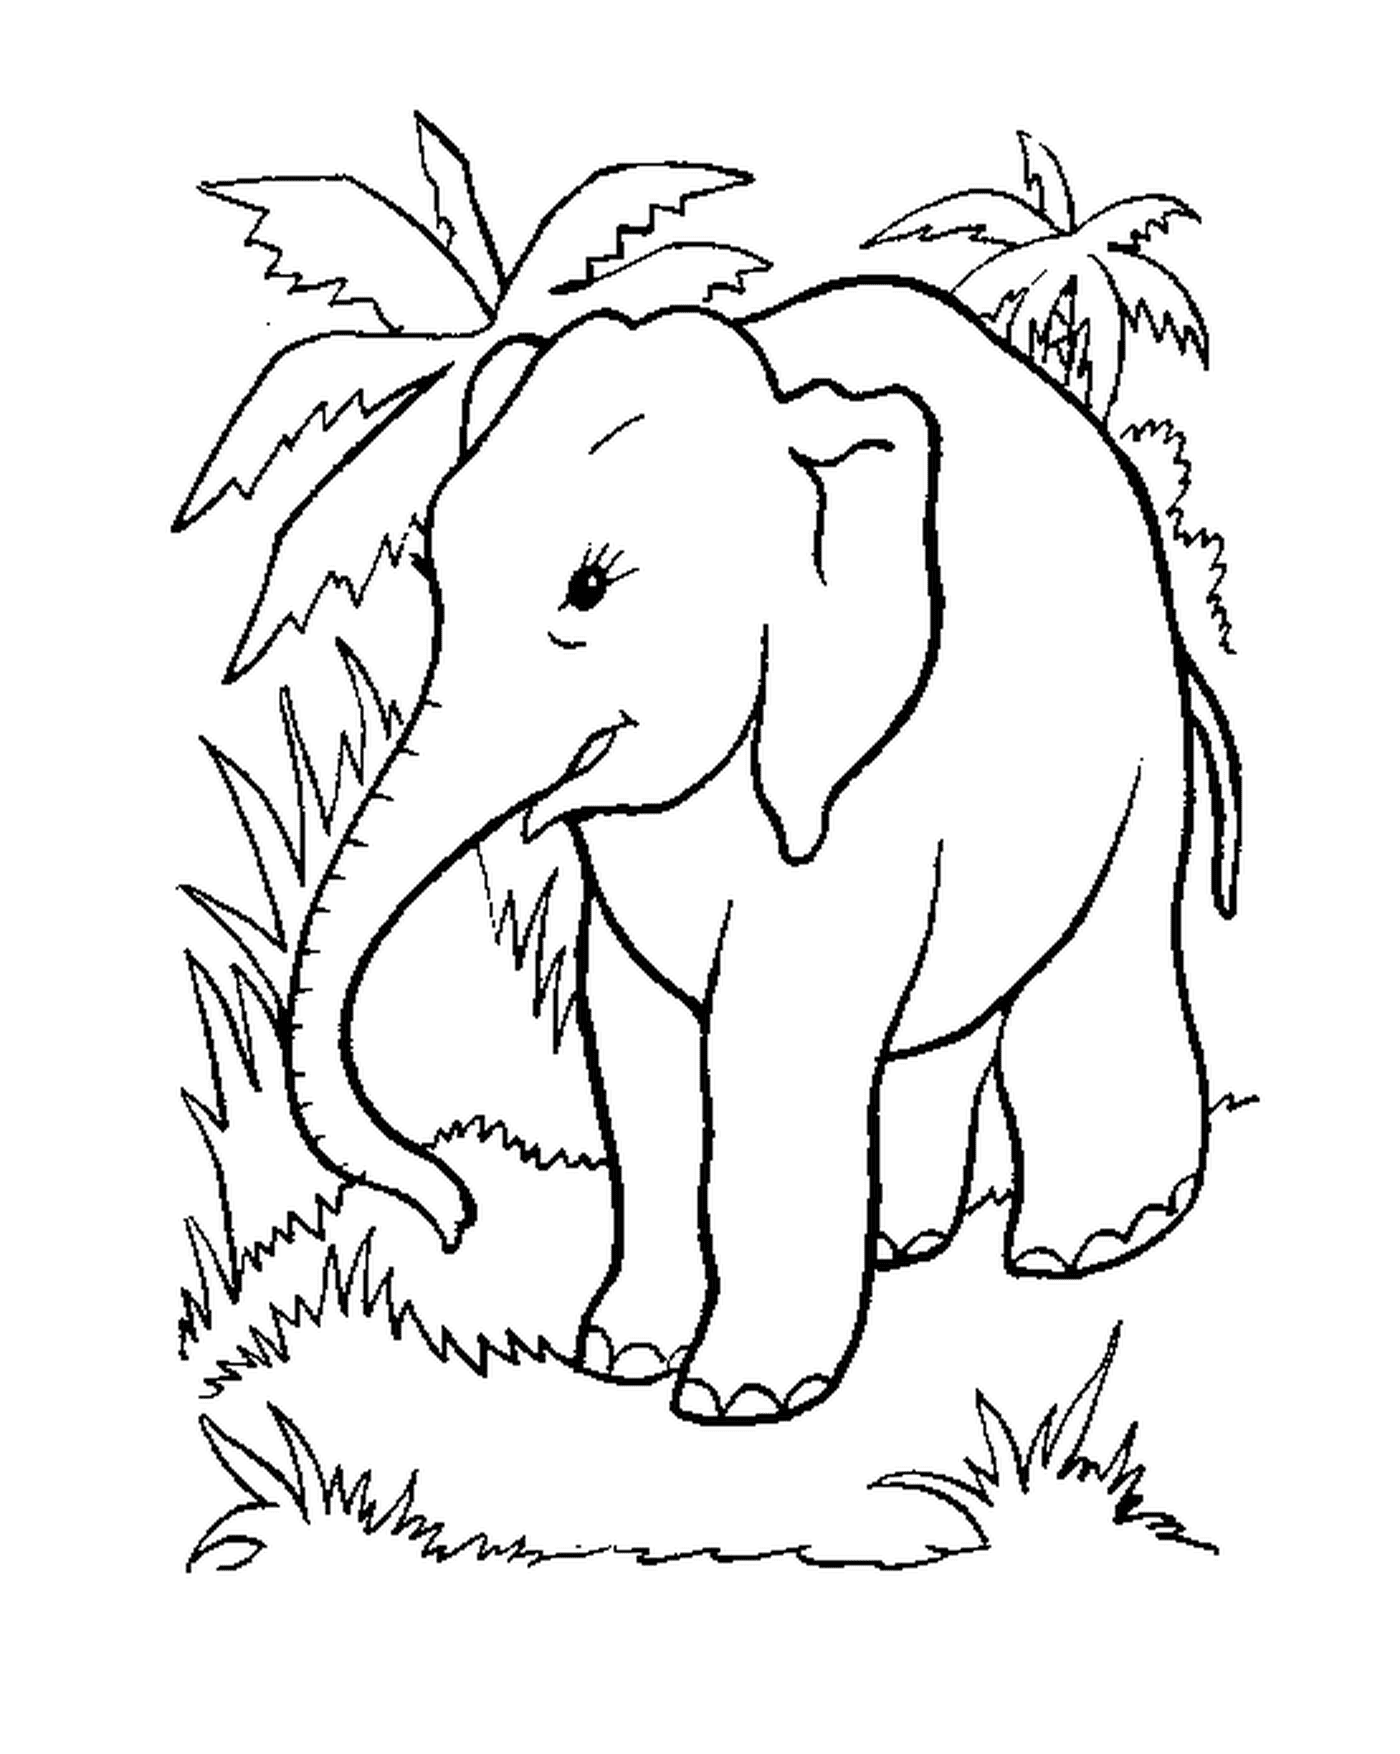  An elephant standing in the grass near a tree 